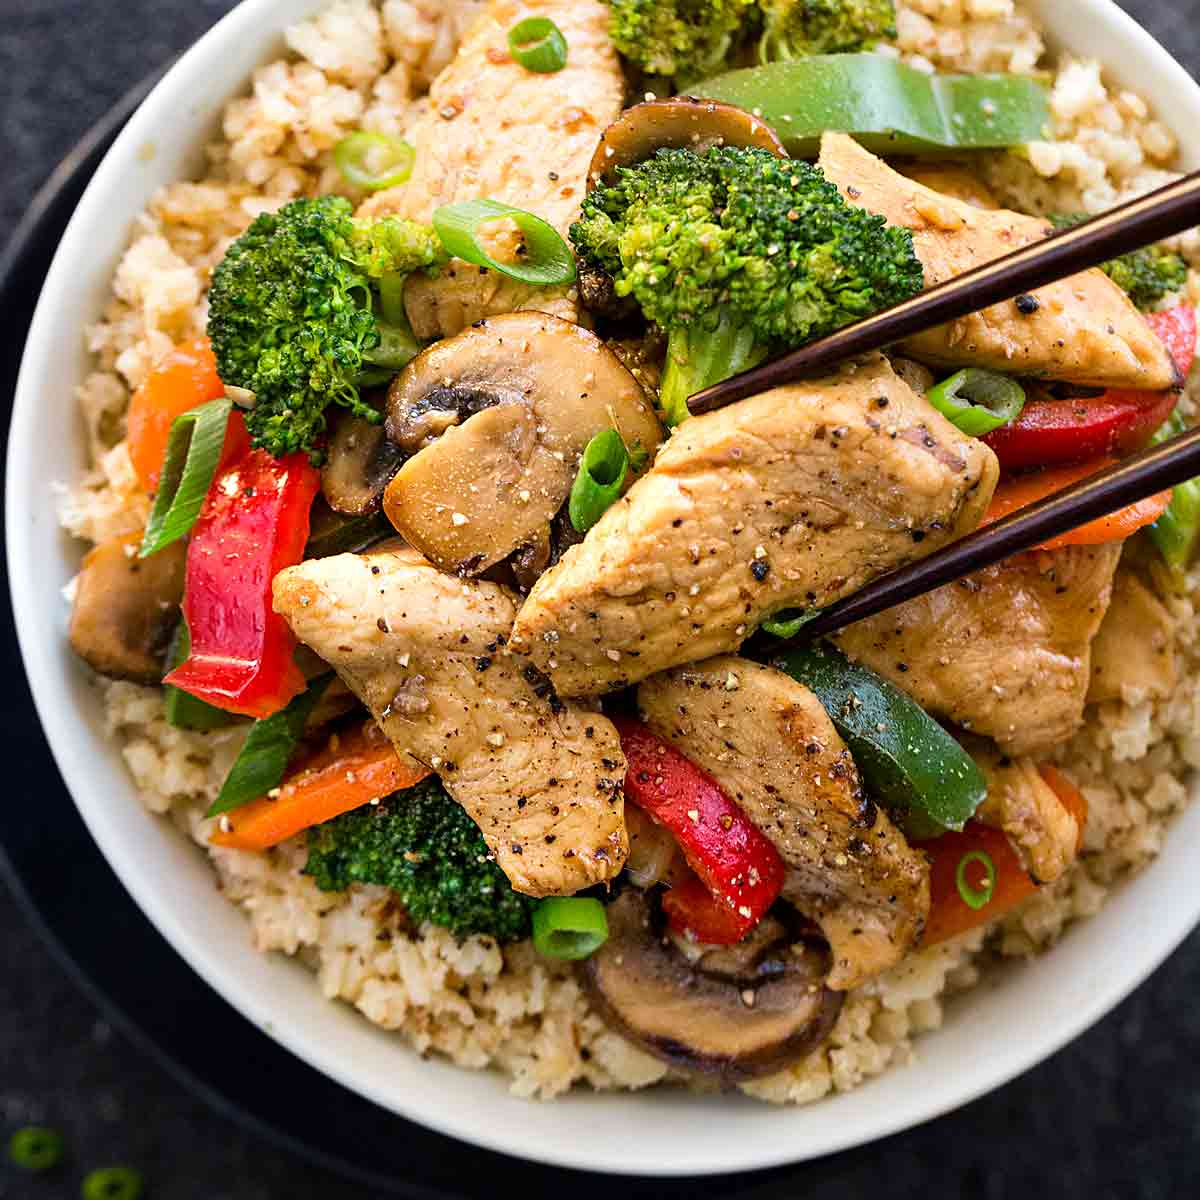 How to Make Chicken Stir Fry Easily